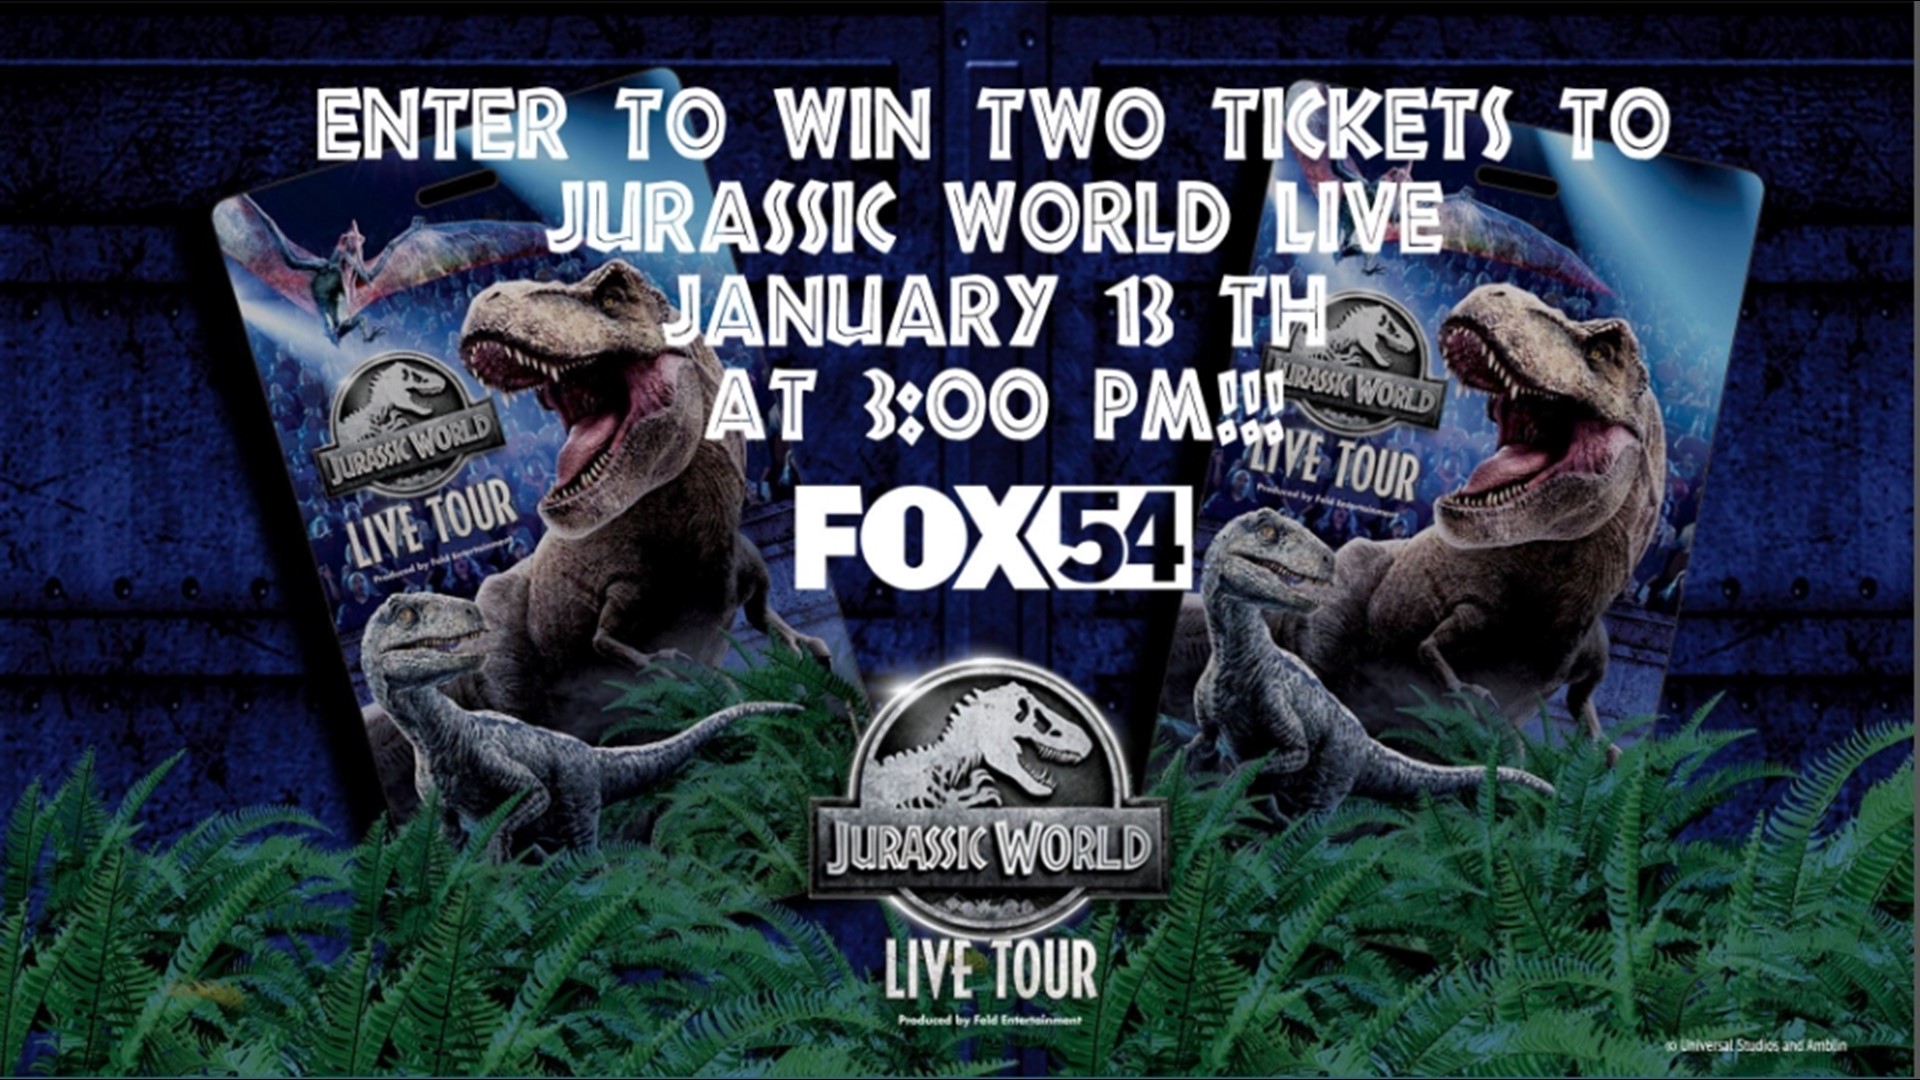 Win your way to Jurassic World at the VBC